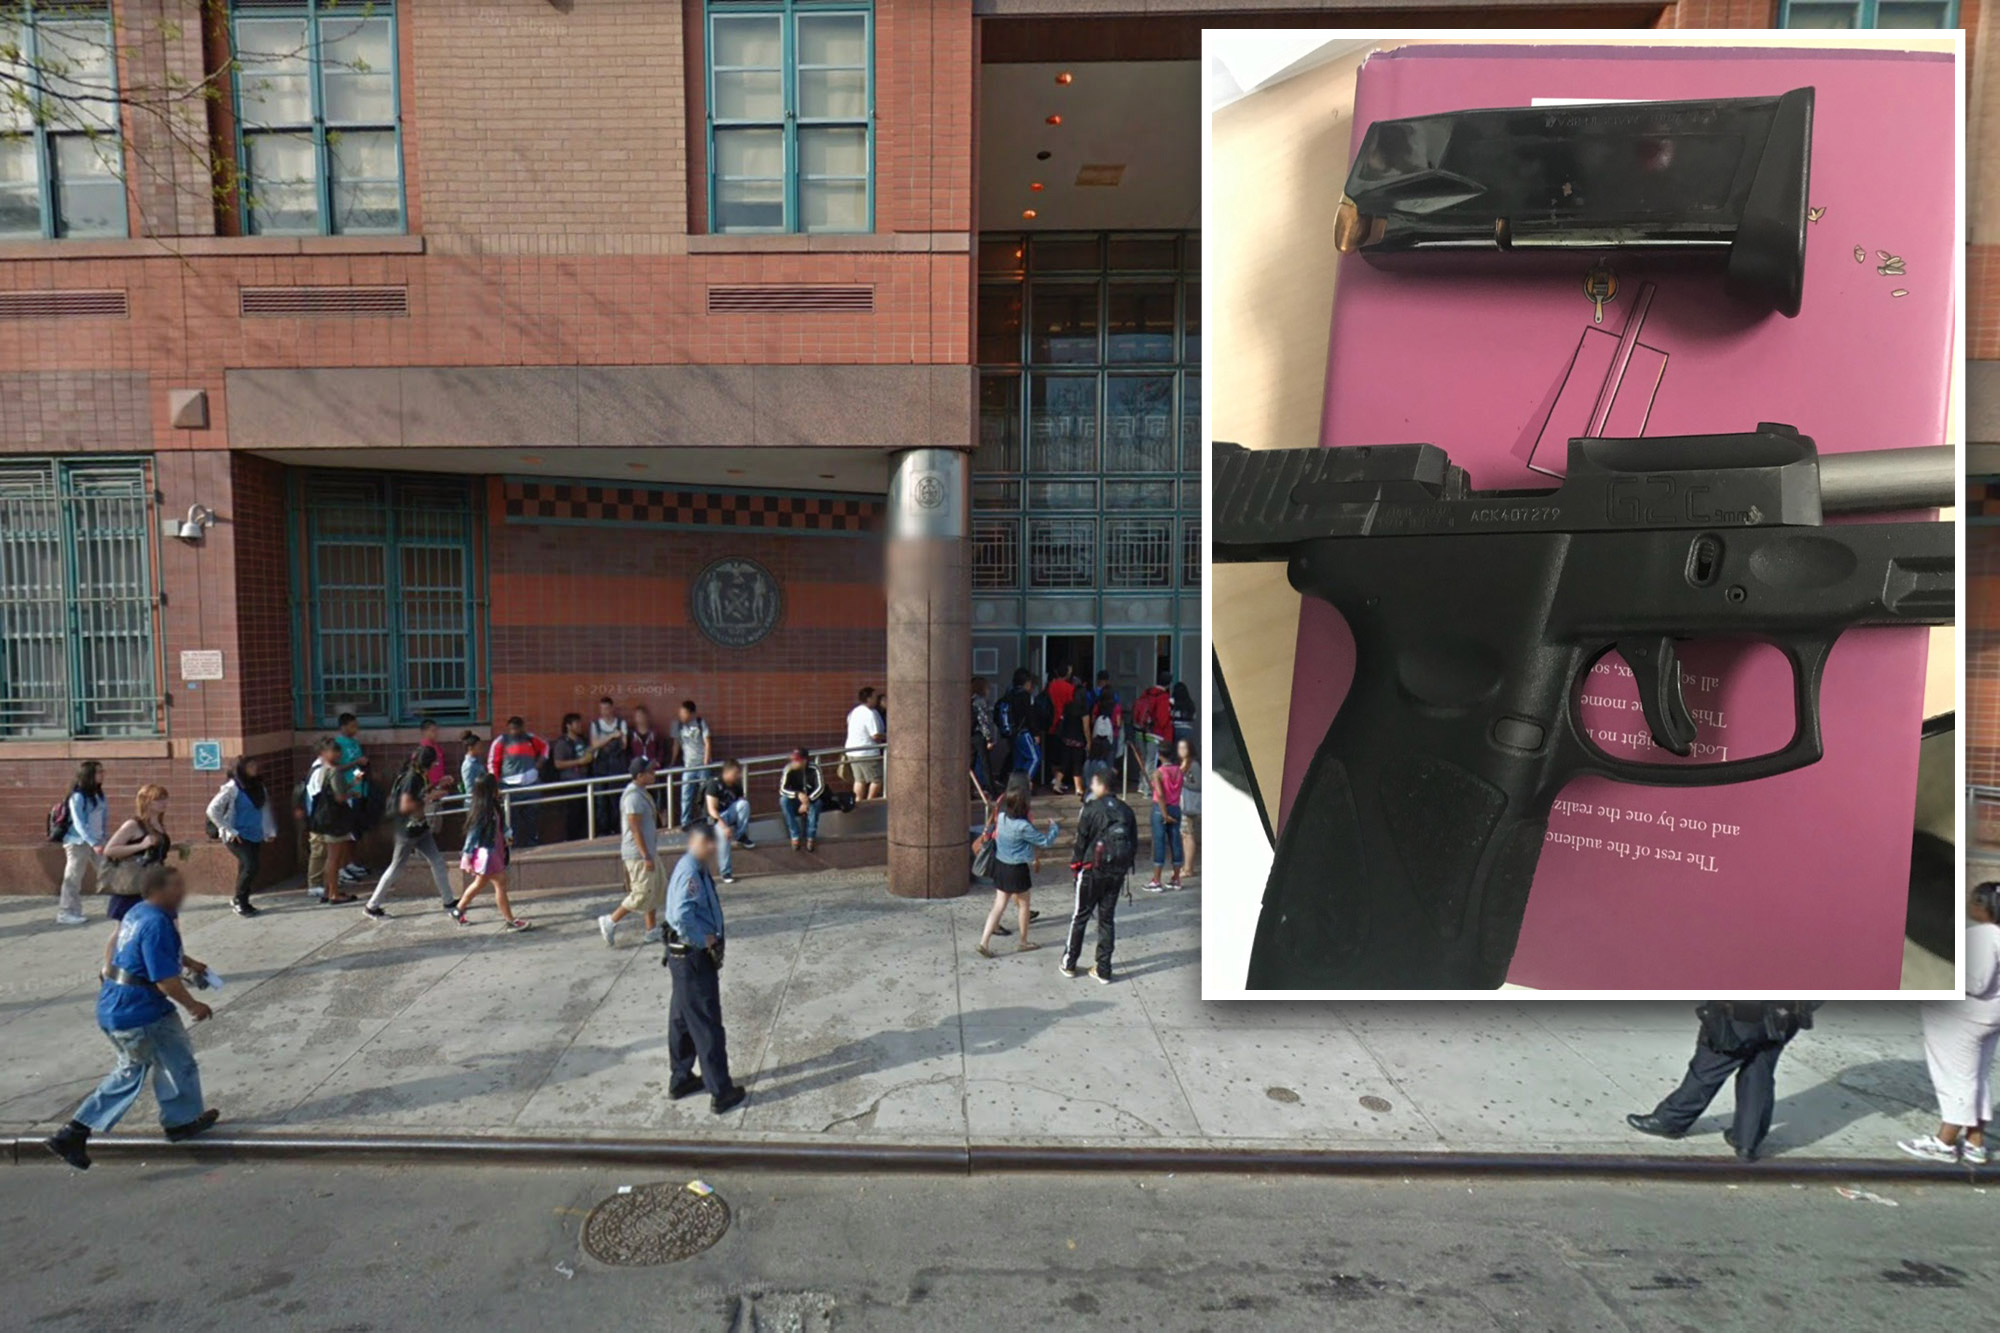 16-year-old questioned after gun found in backpack at Long Island City high school